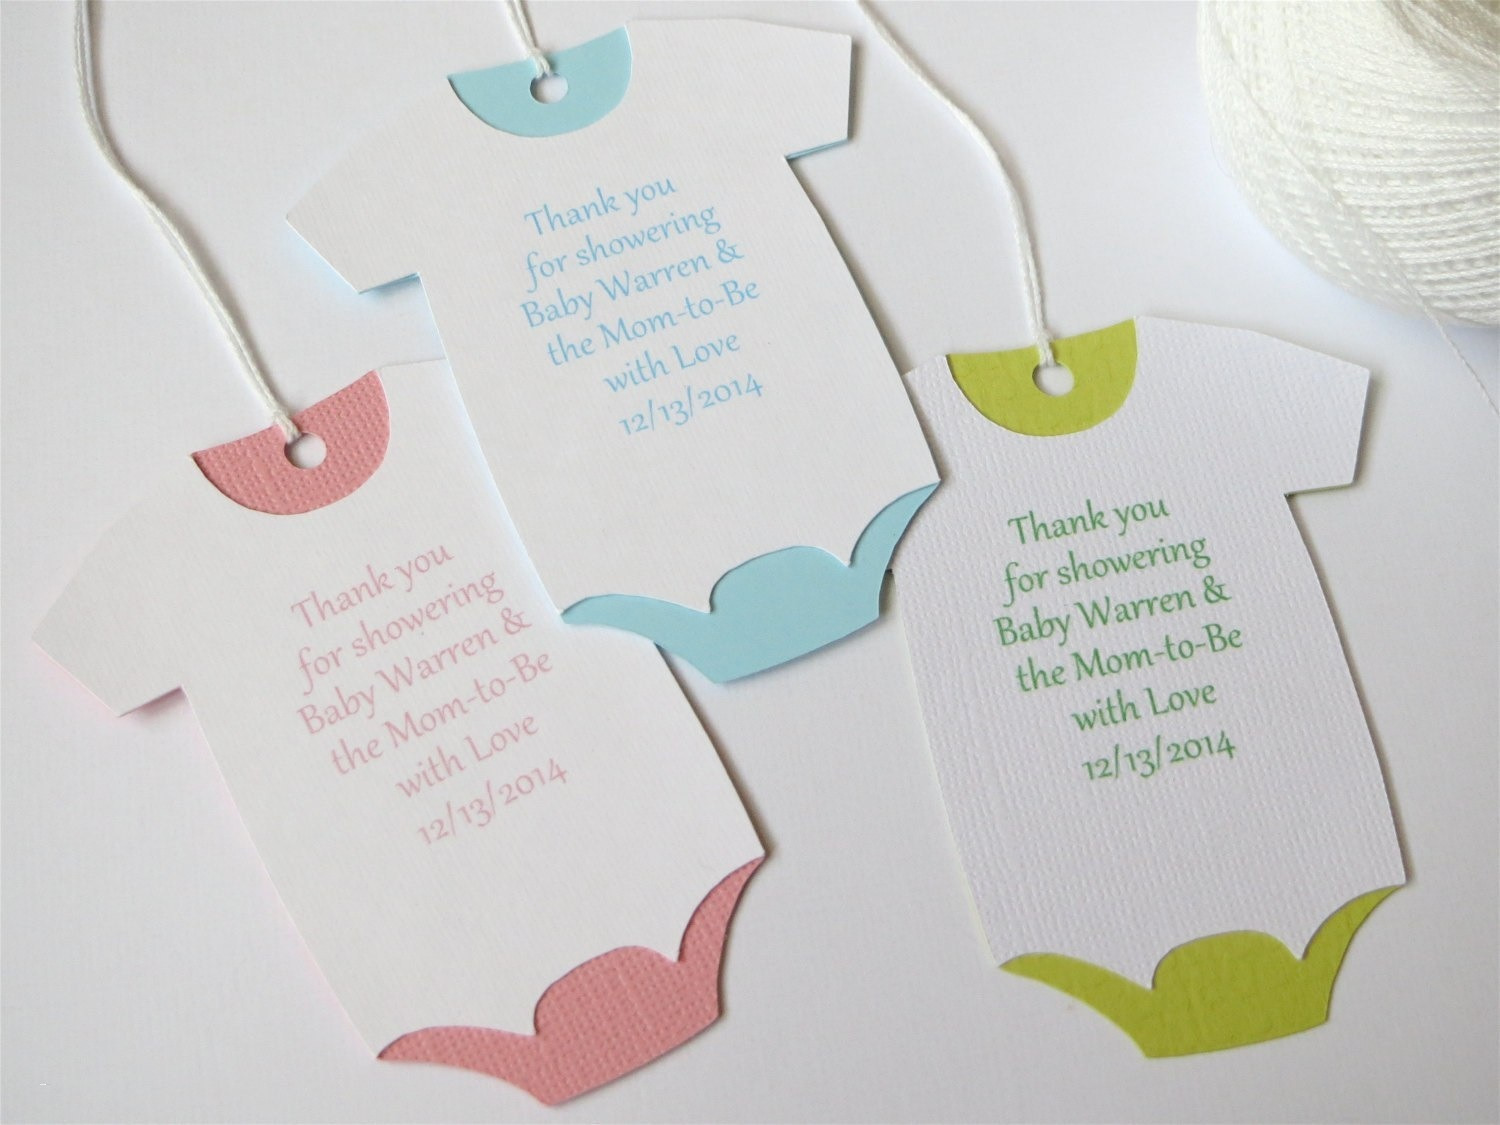 Full Size of Baby Shower:72+ Rousing Baby Shower Thank You Cards Picture Ideas Baby Shower Thank U Cards Lovely To Write Baby Shower Thank You Baby Shower Thank U Cards New Wedding Gifts Thank You Cards Luxury Baby Shower Thank You